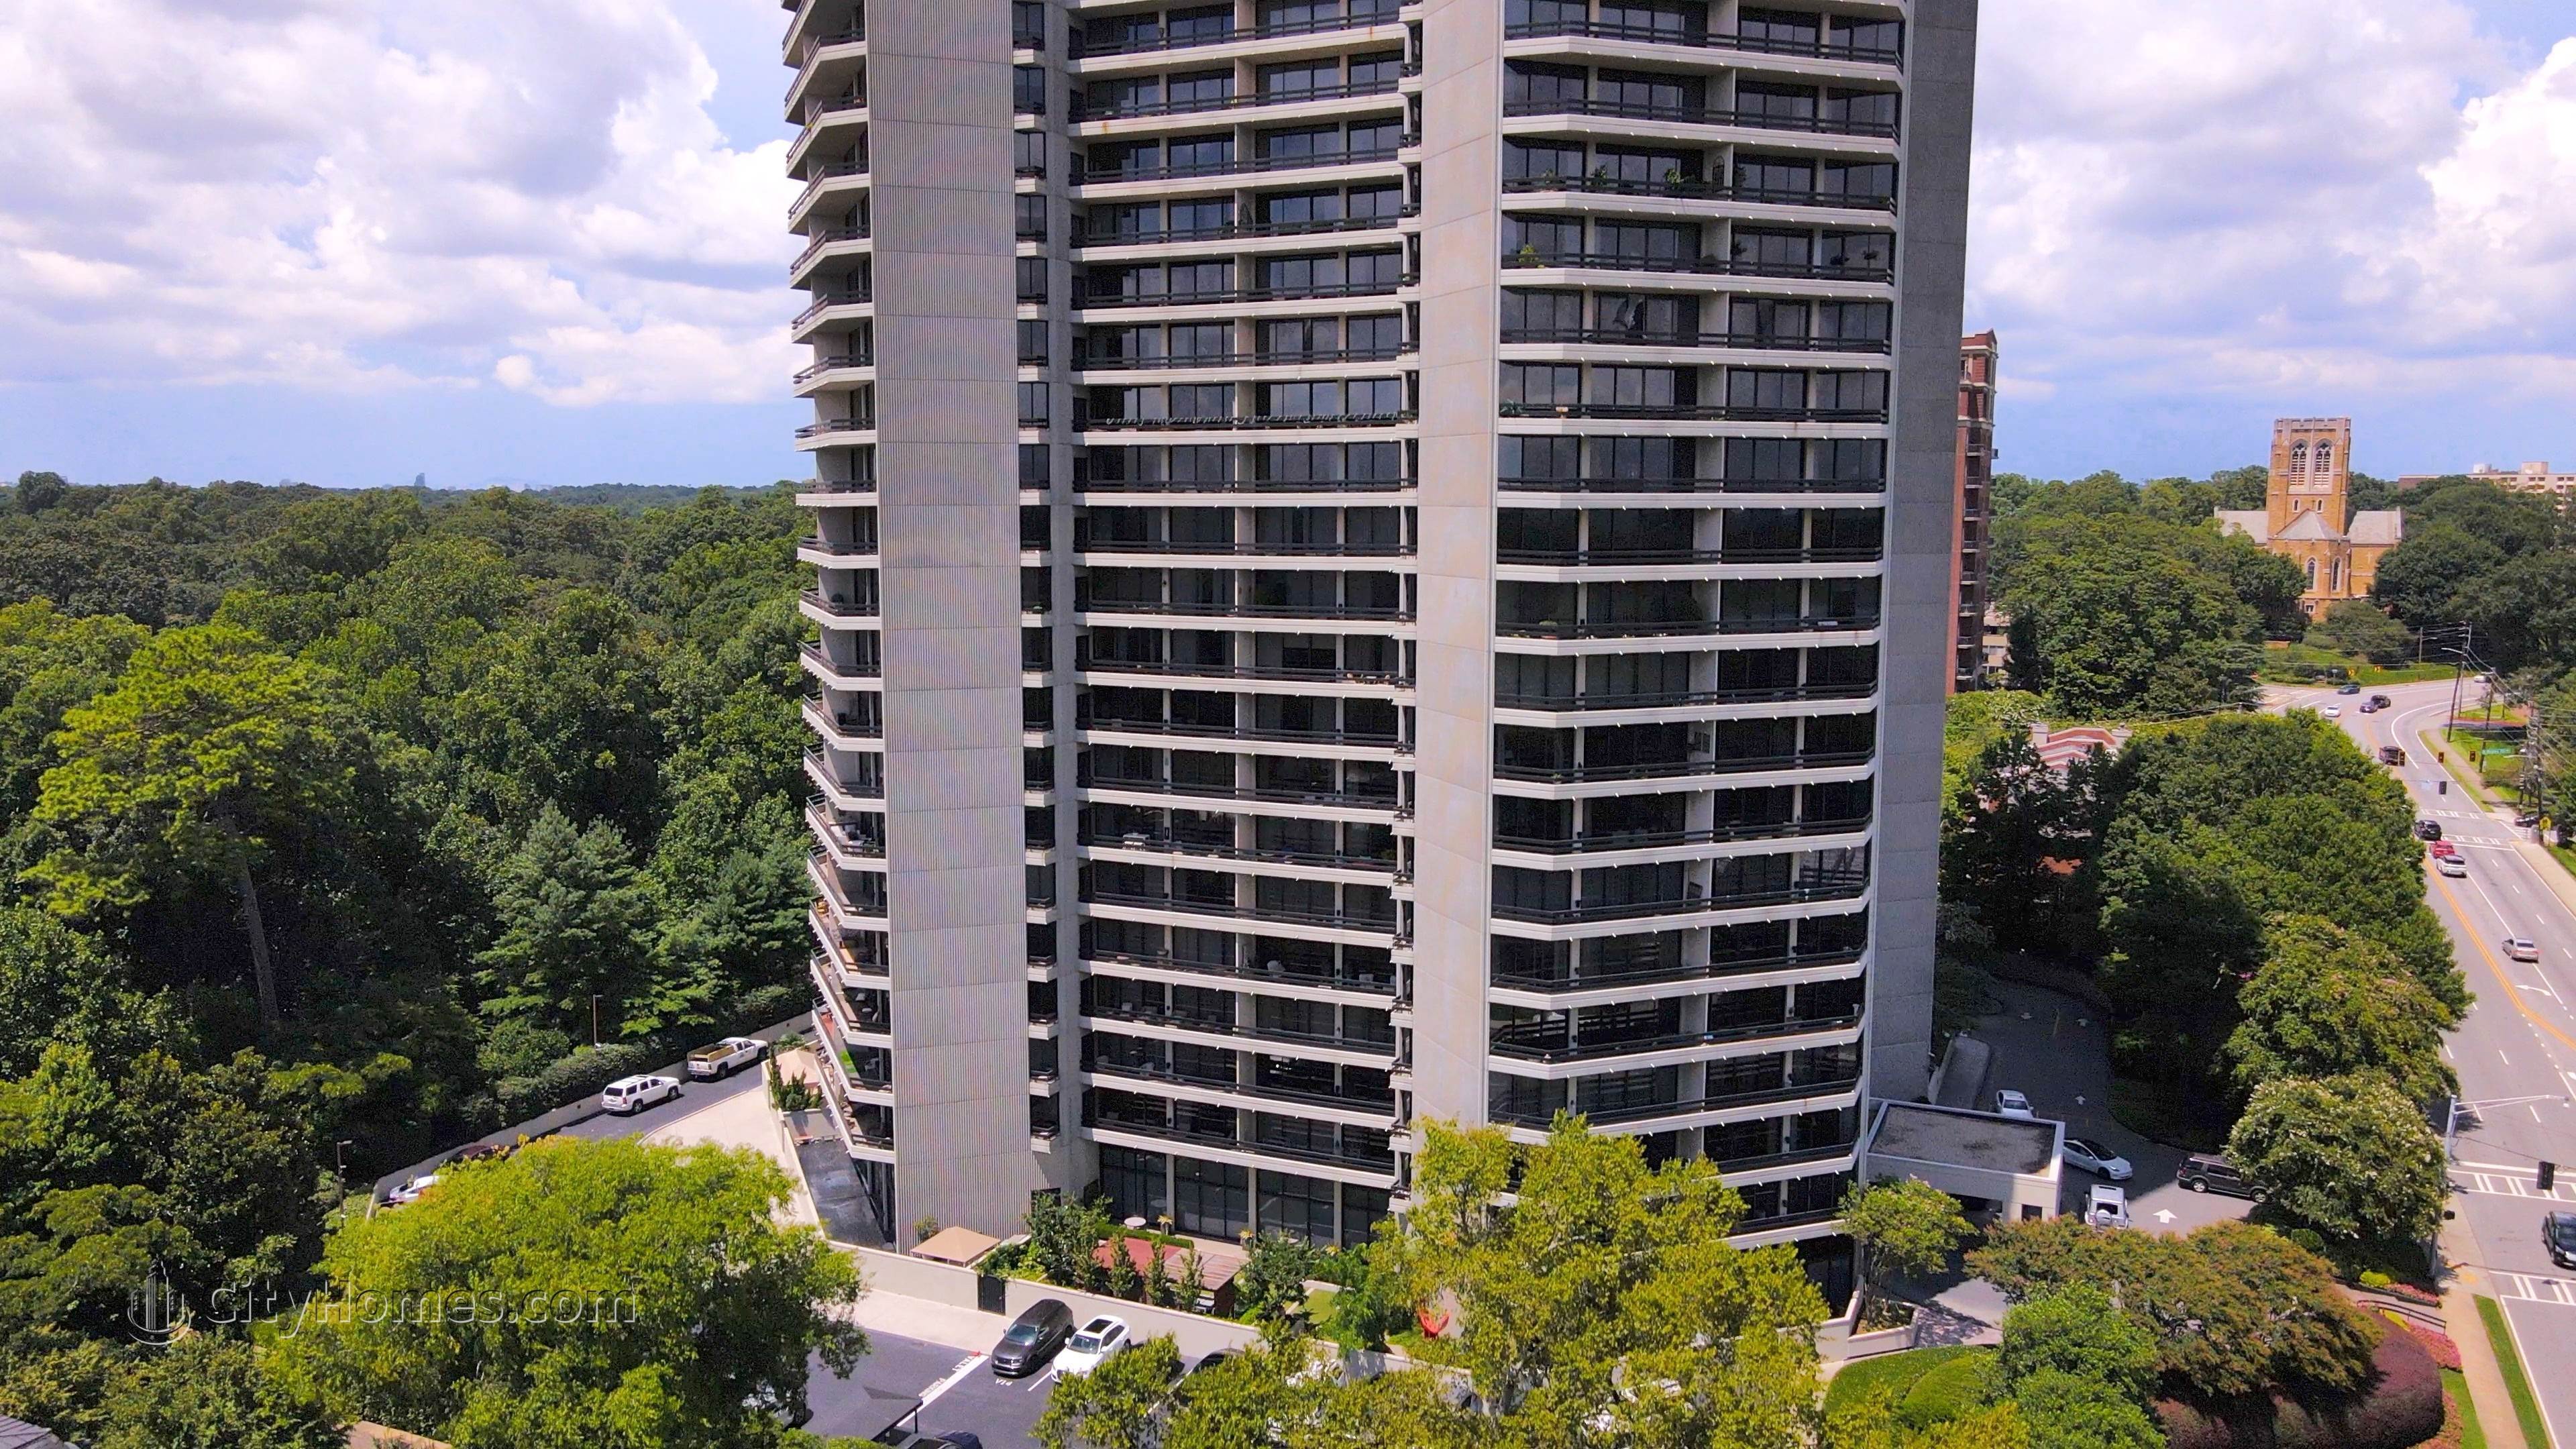 Park Place on Peachtree κτίριο σε 2660 Peachtree Rd, Peachtree Heights West, Atlanta, GA 30305